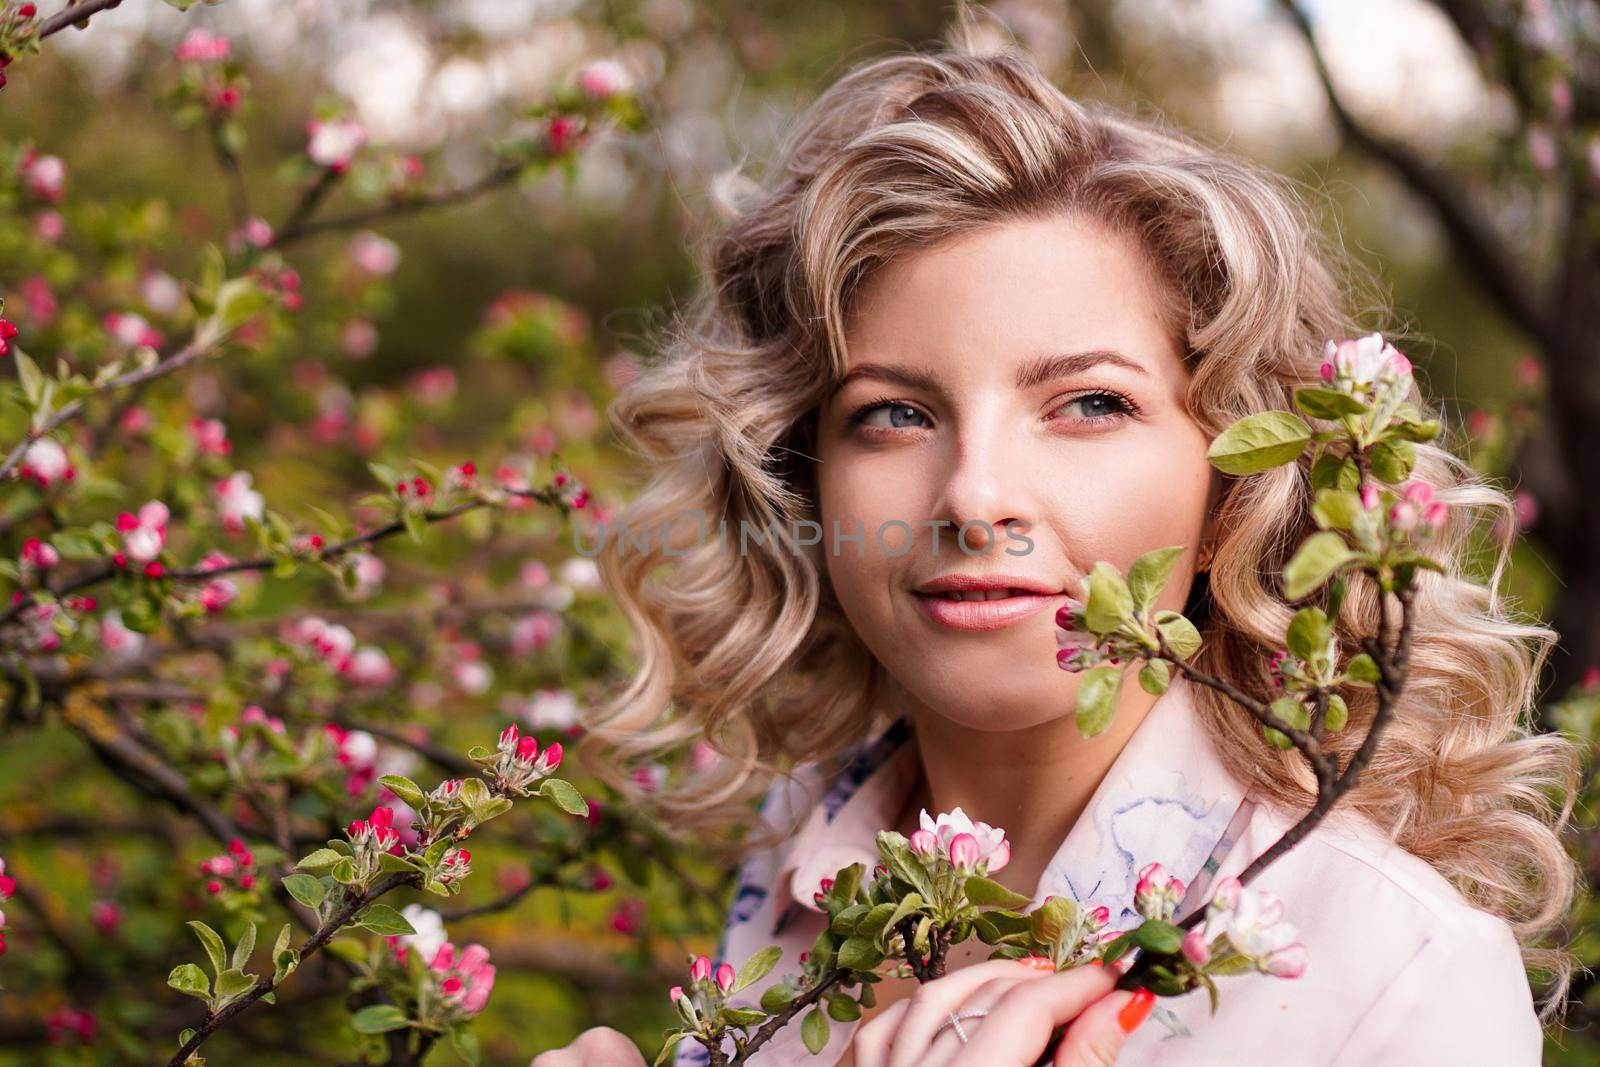 Romantic young woman in the spring garden among apple blossom. by natali_brill